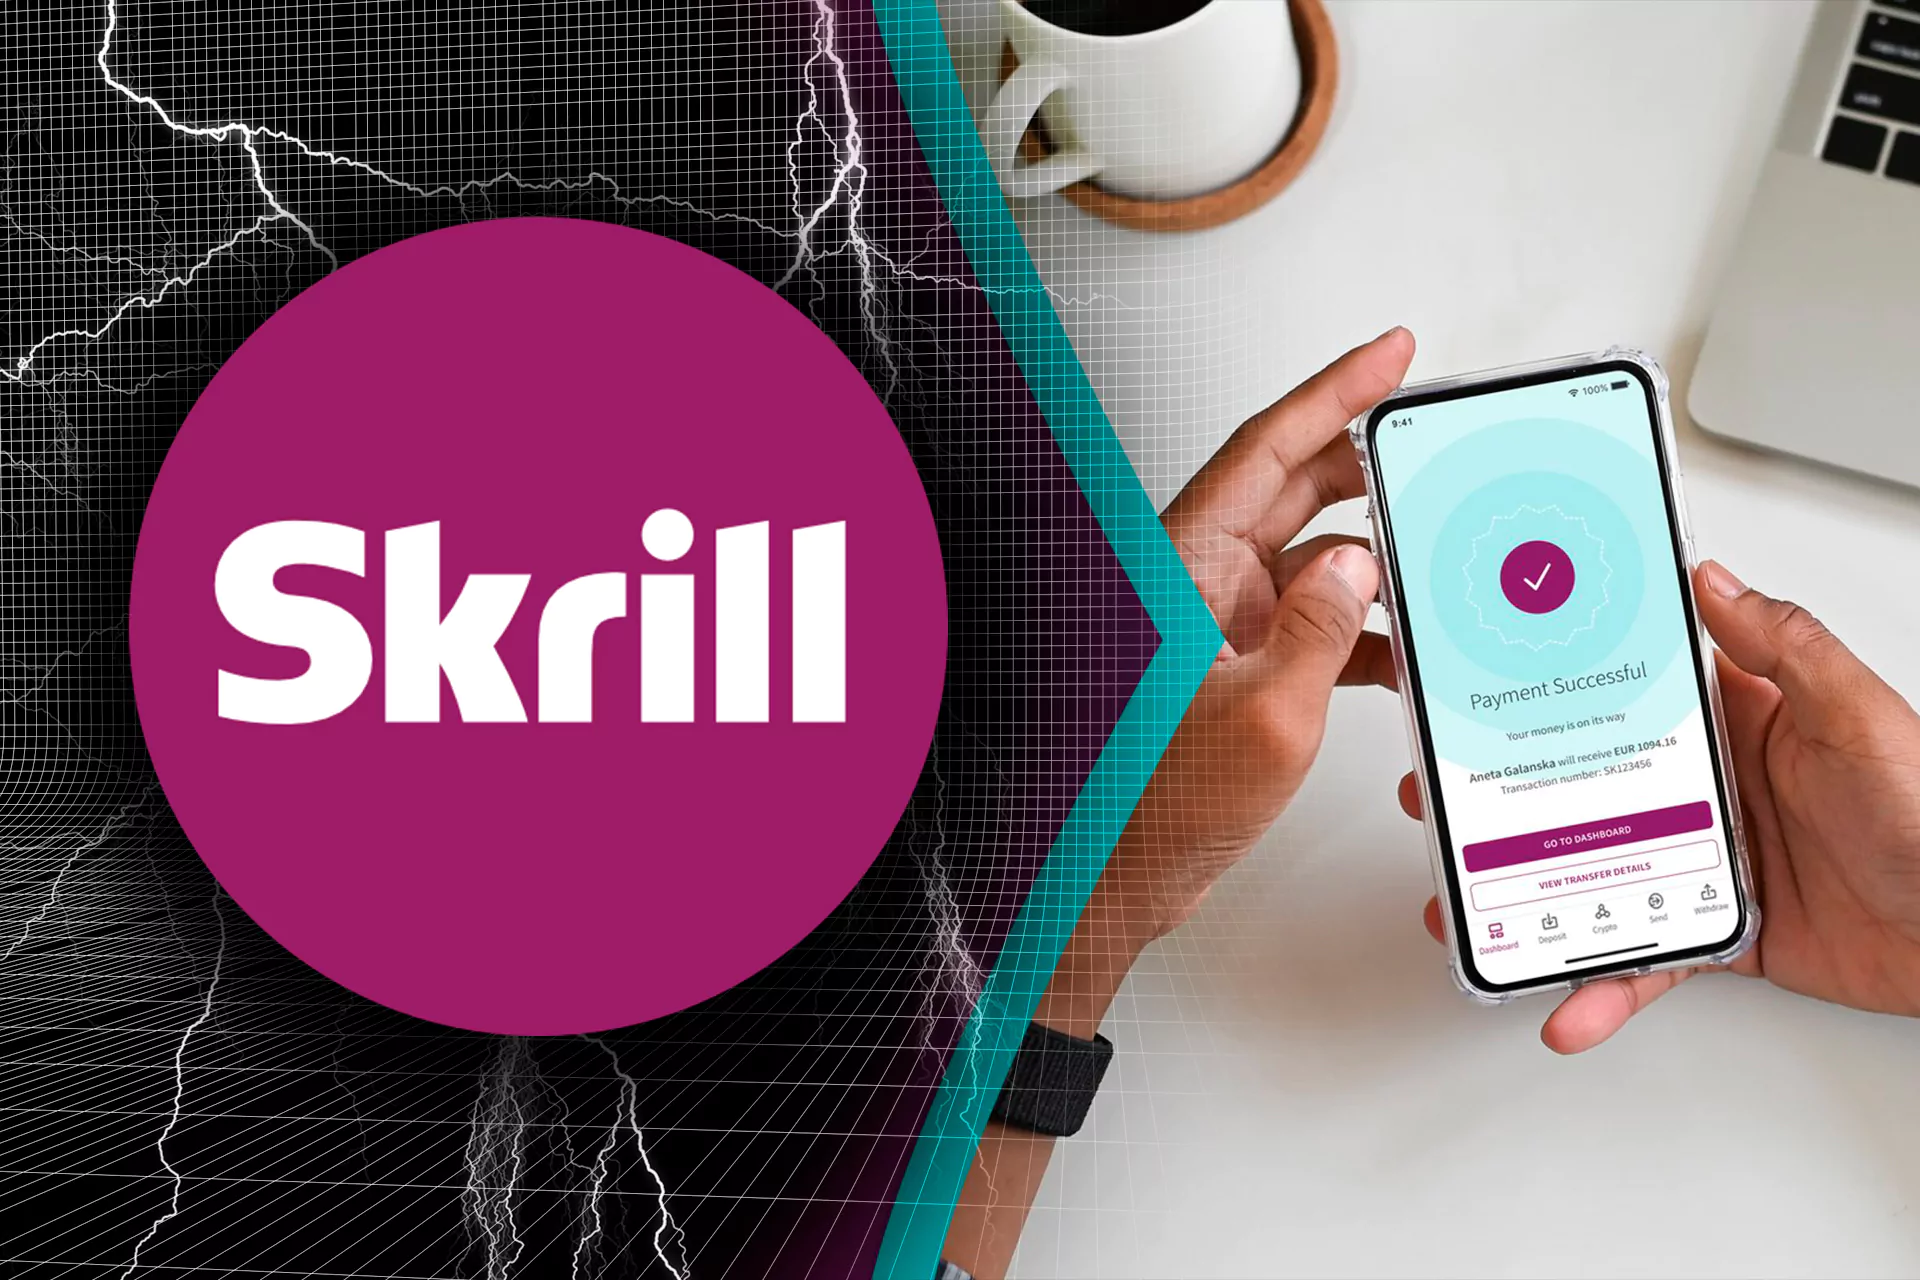 Bettors choose Skrill because its payments make online betting fast, smart and discreet.